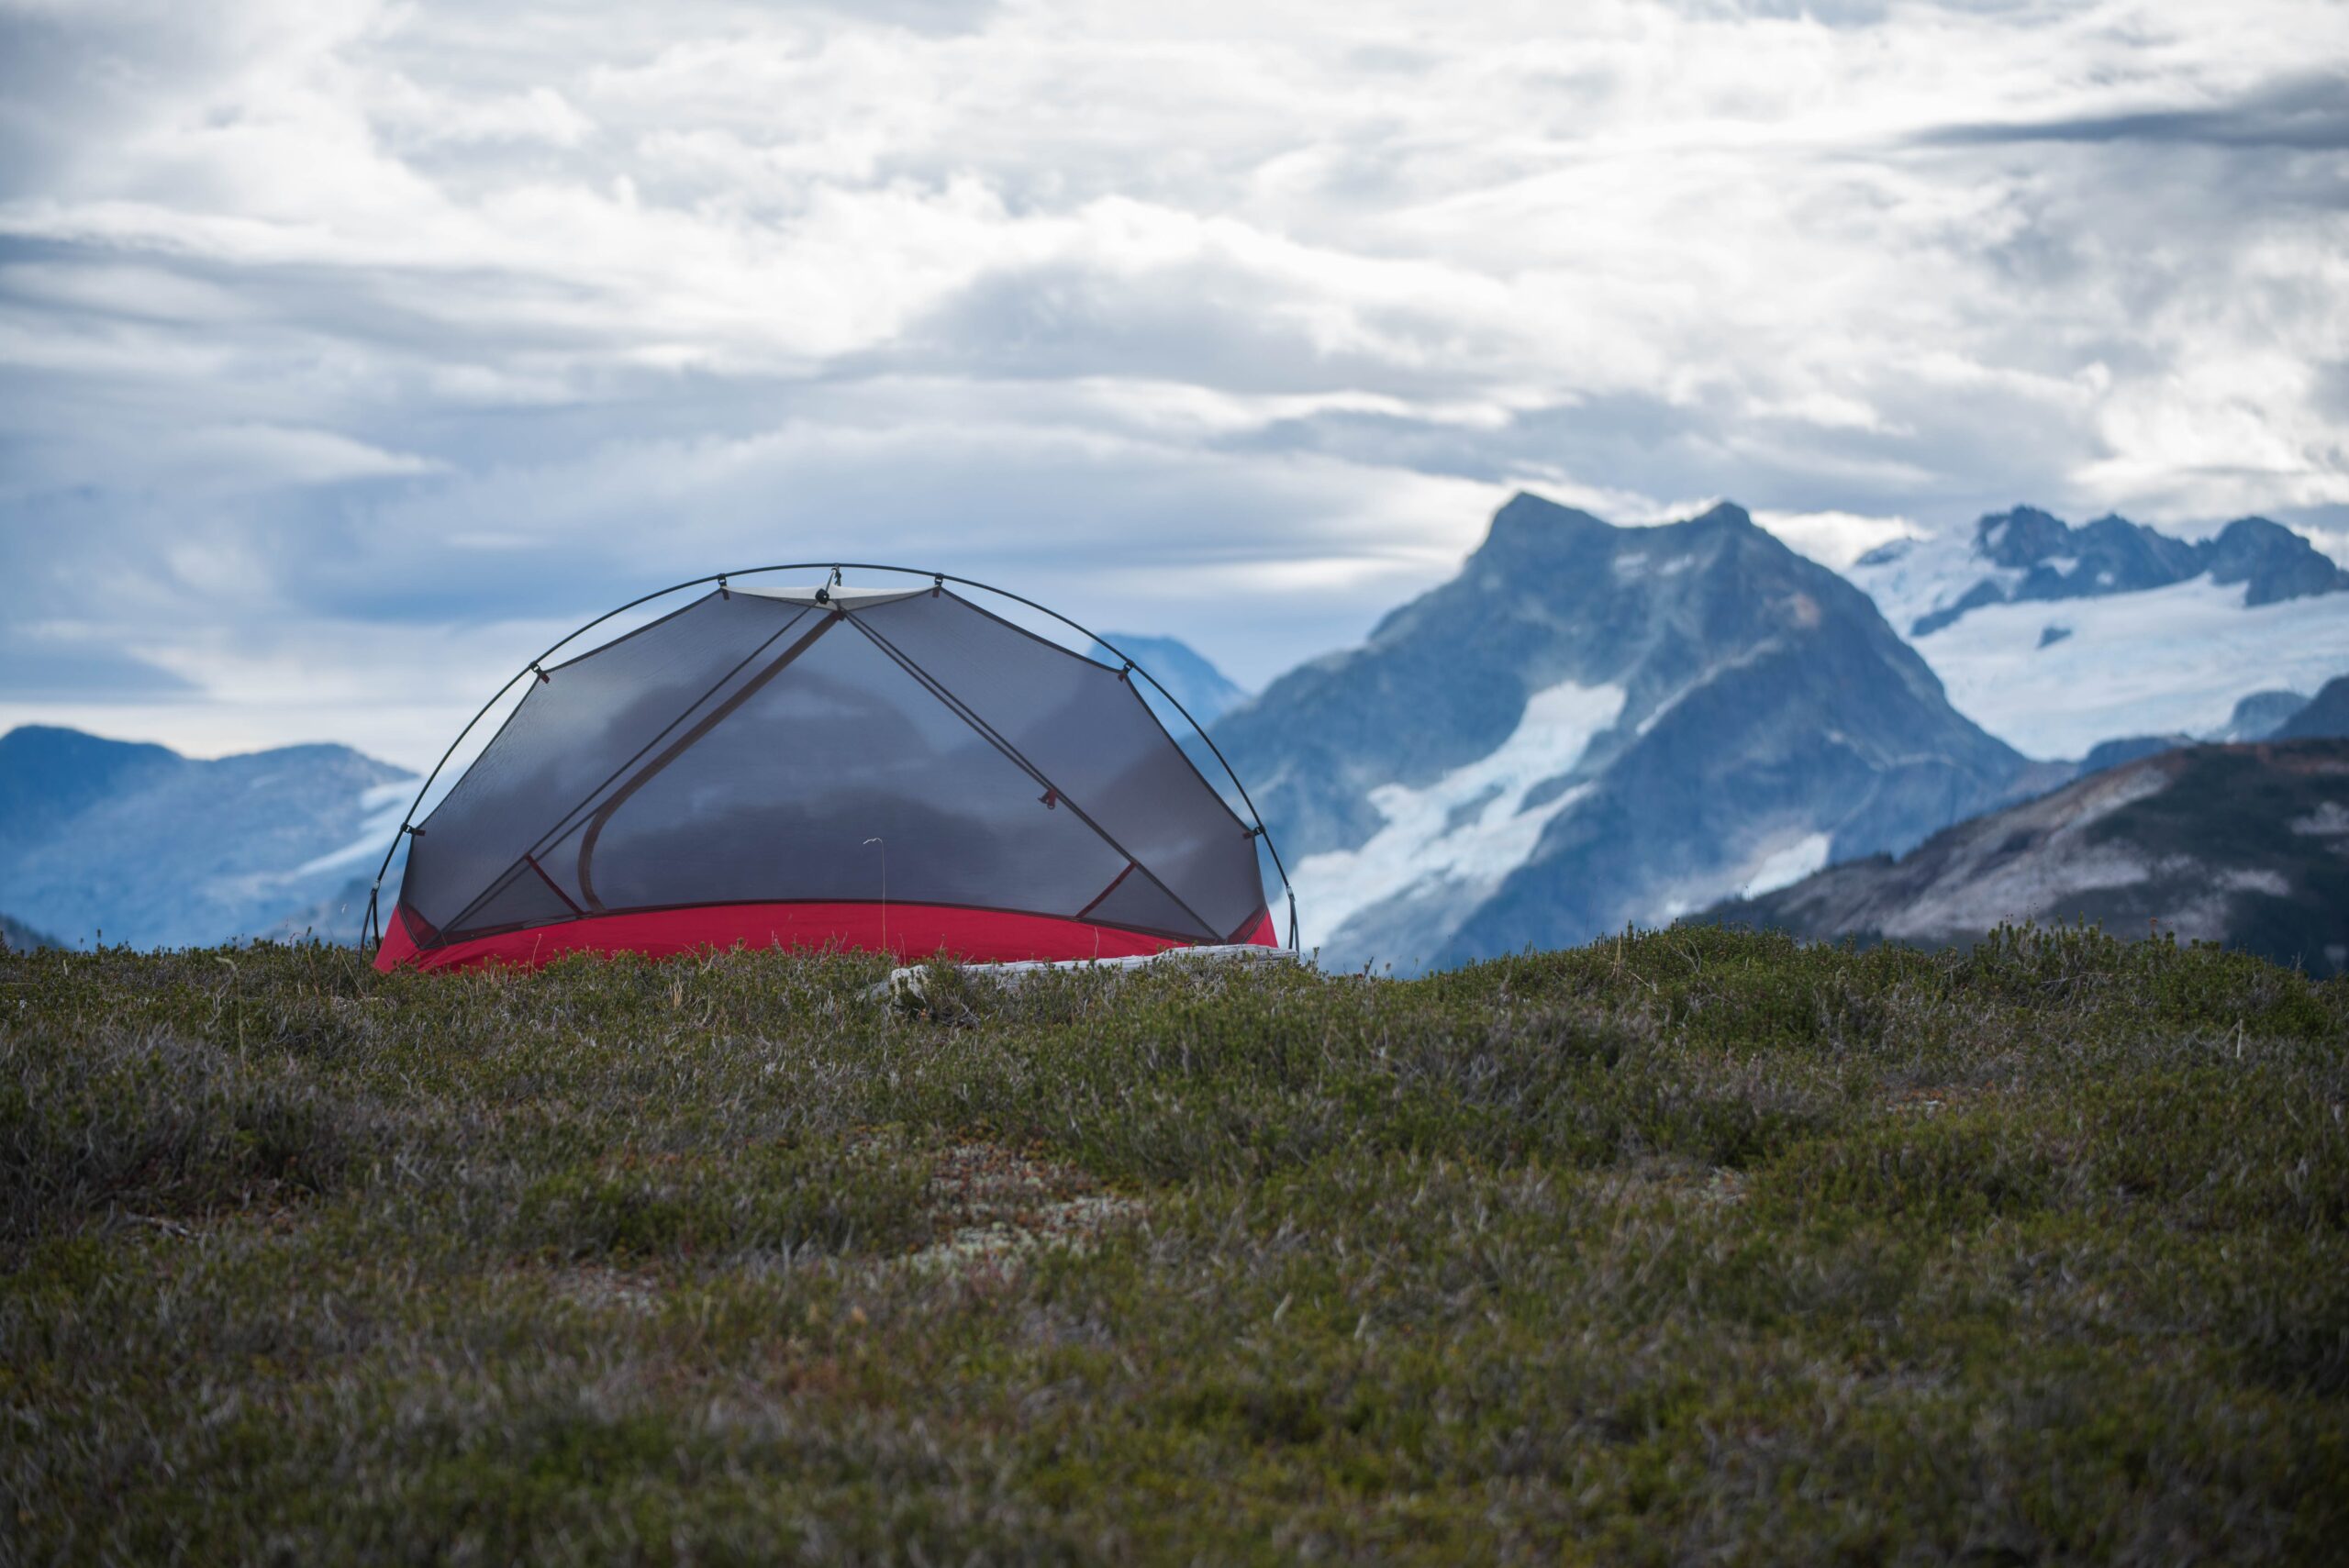 Will A Space Heater Keep A Tent Warm?